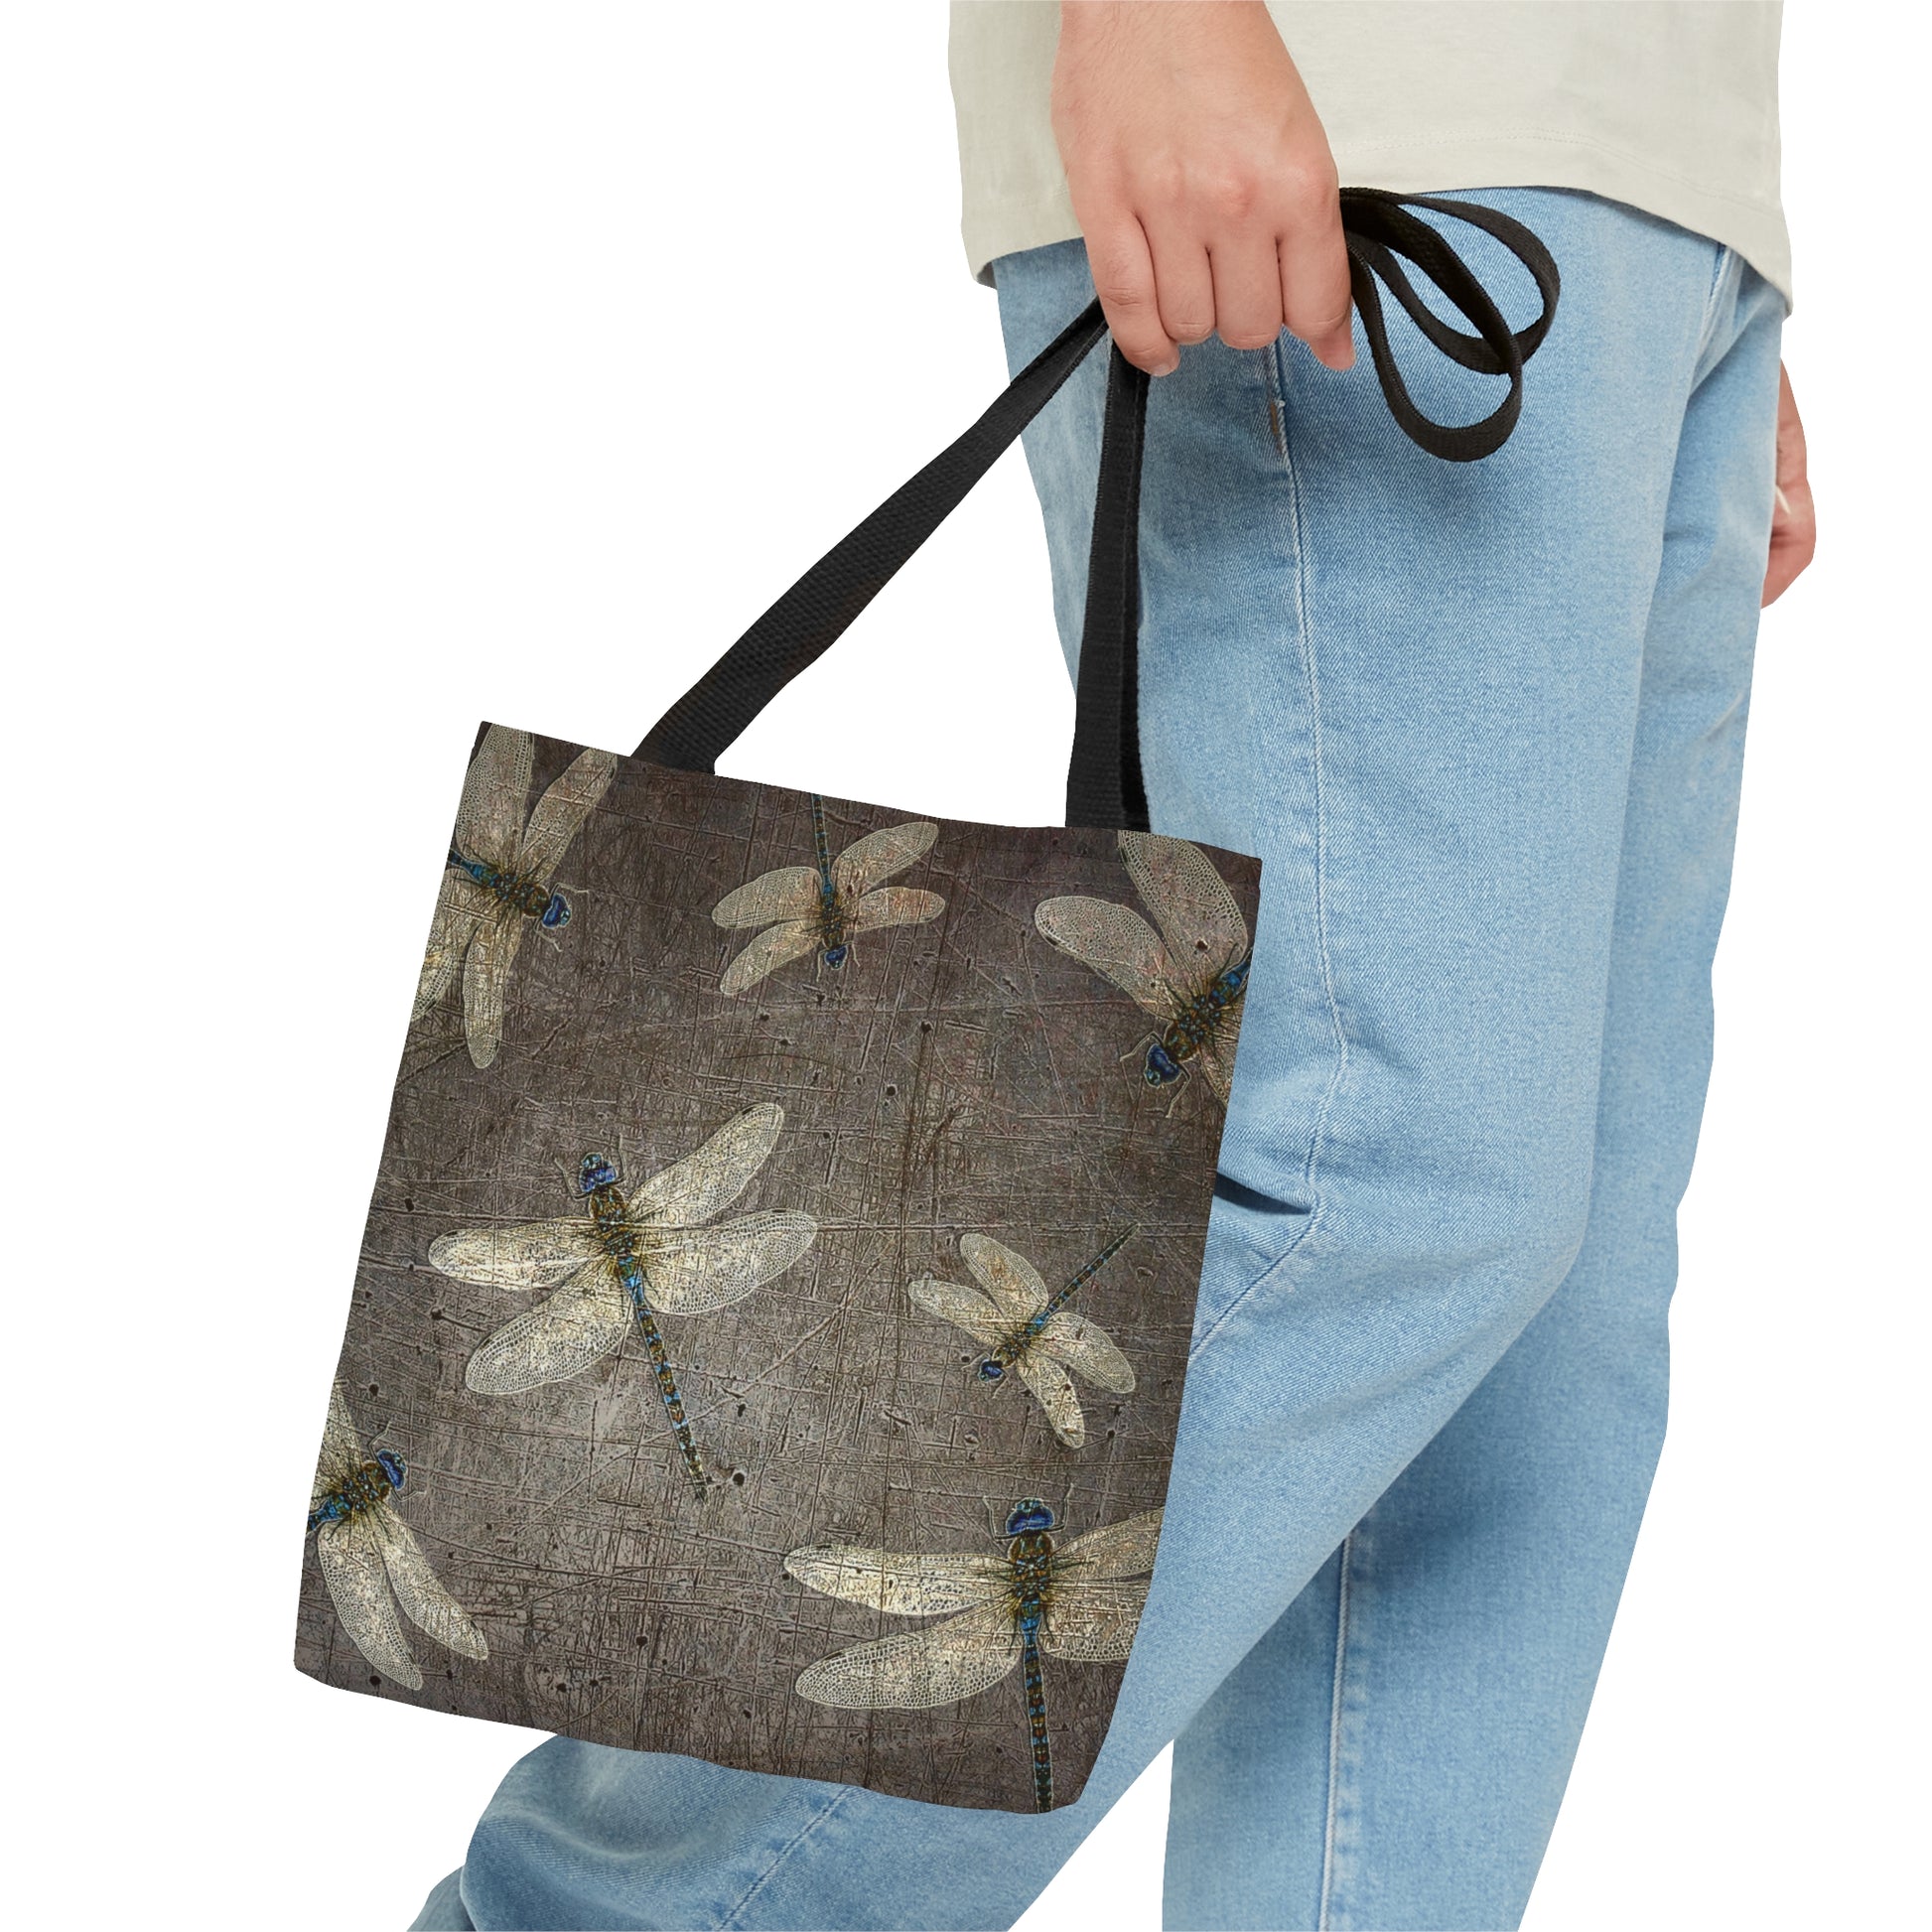 Flight of Dragonflies on Distressed Gray Stone Printed on Tote Bag small carried